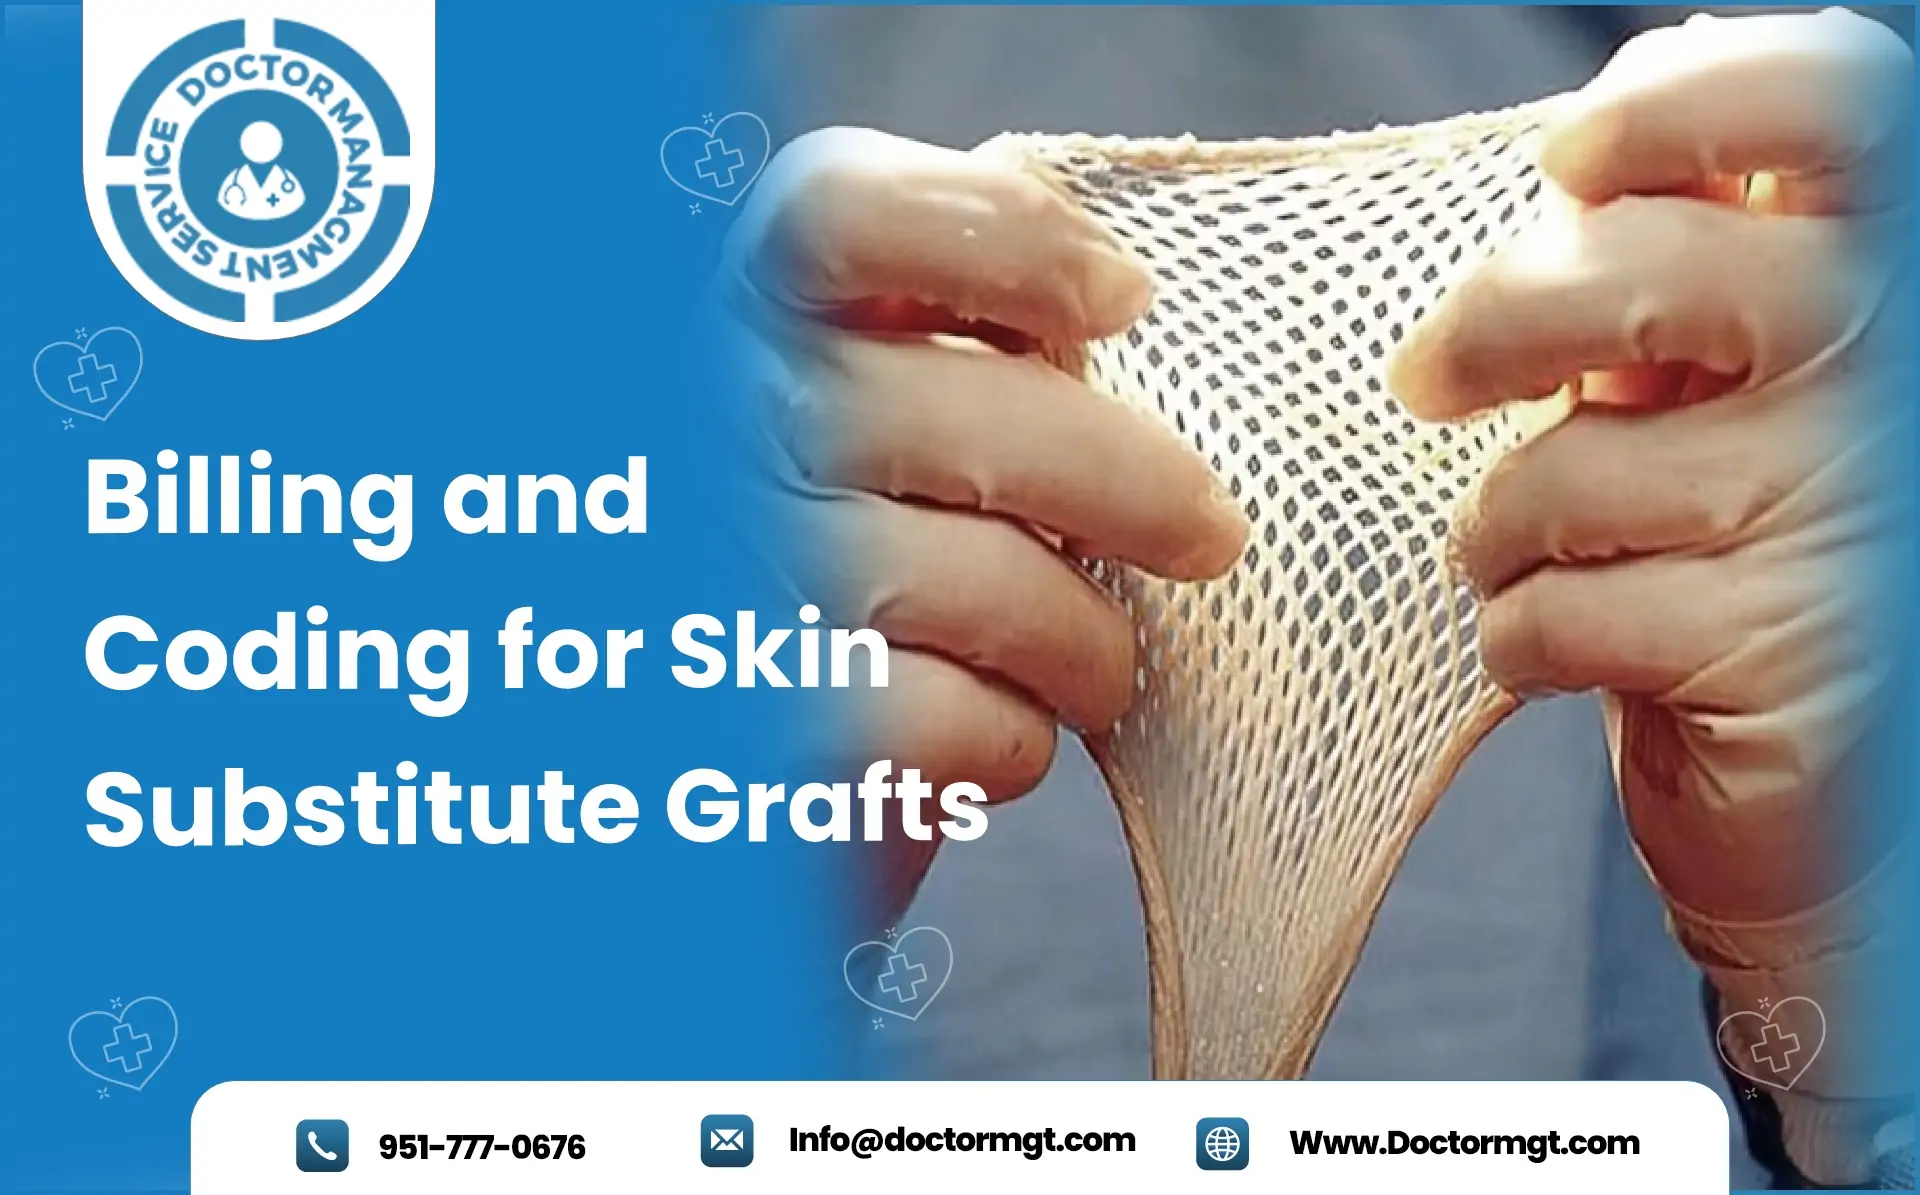 Billing and Coding for Skin Substitute Grafts